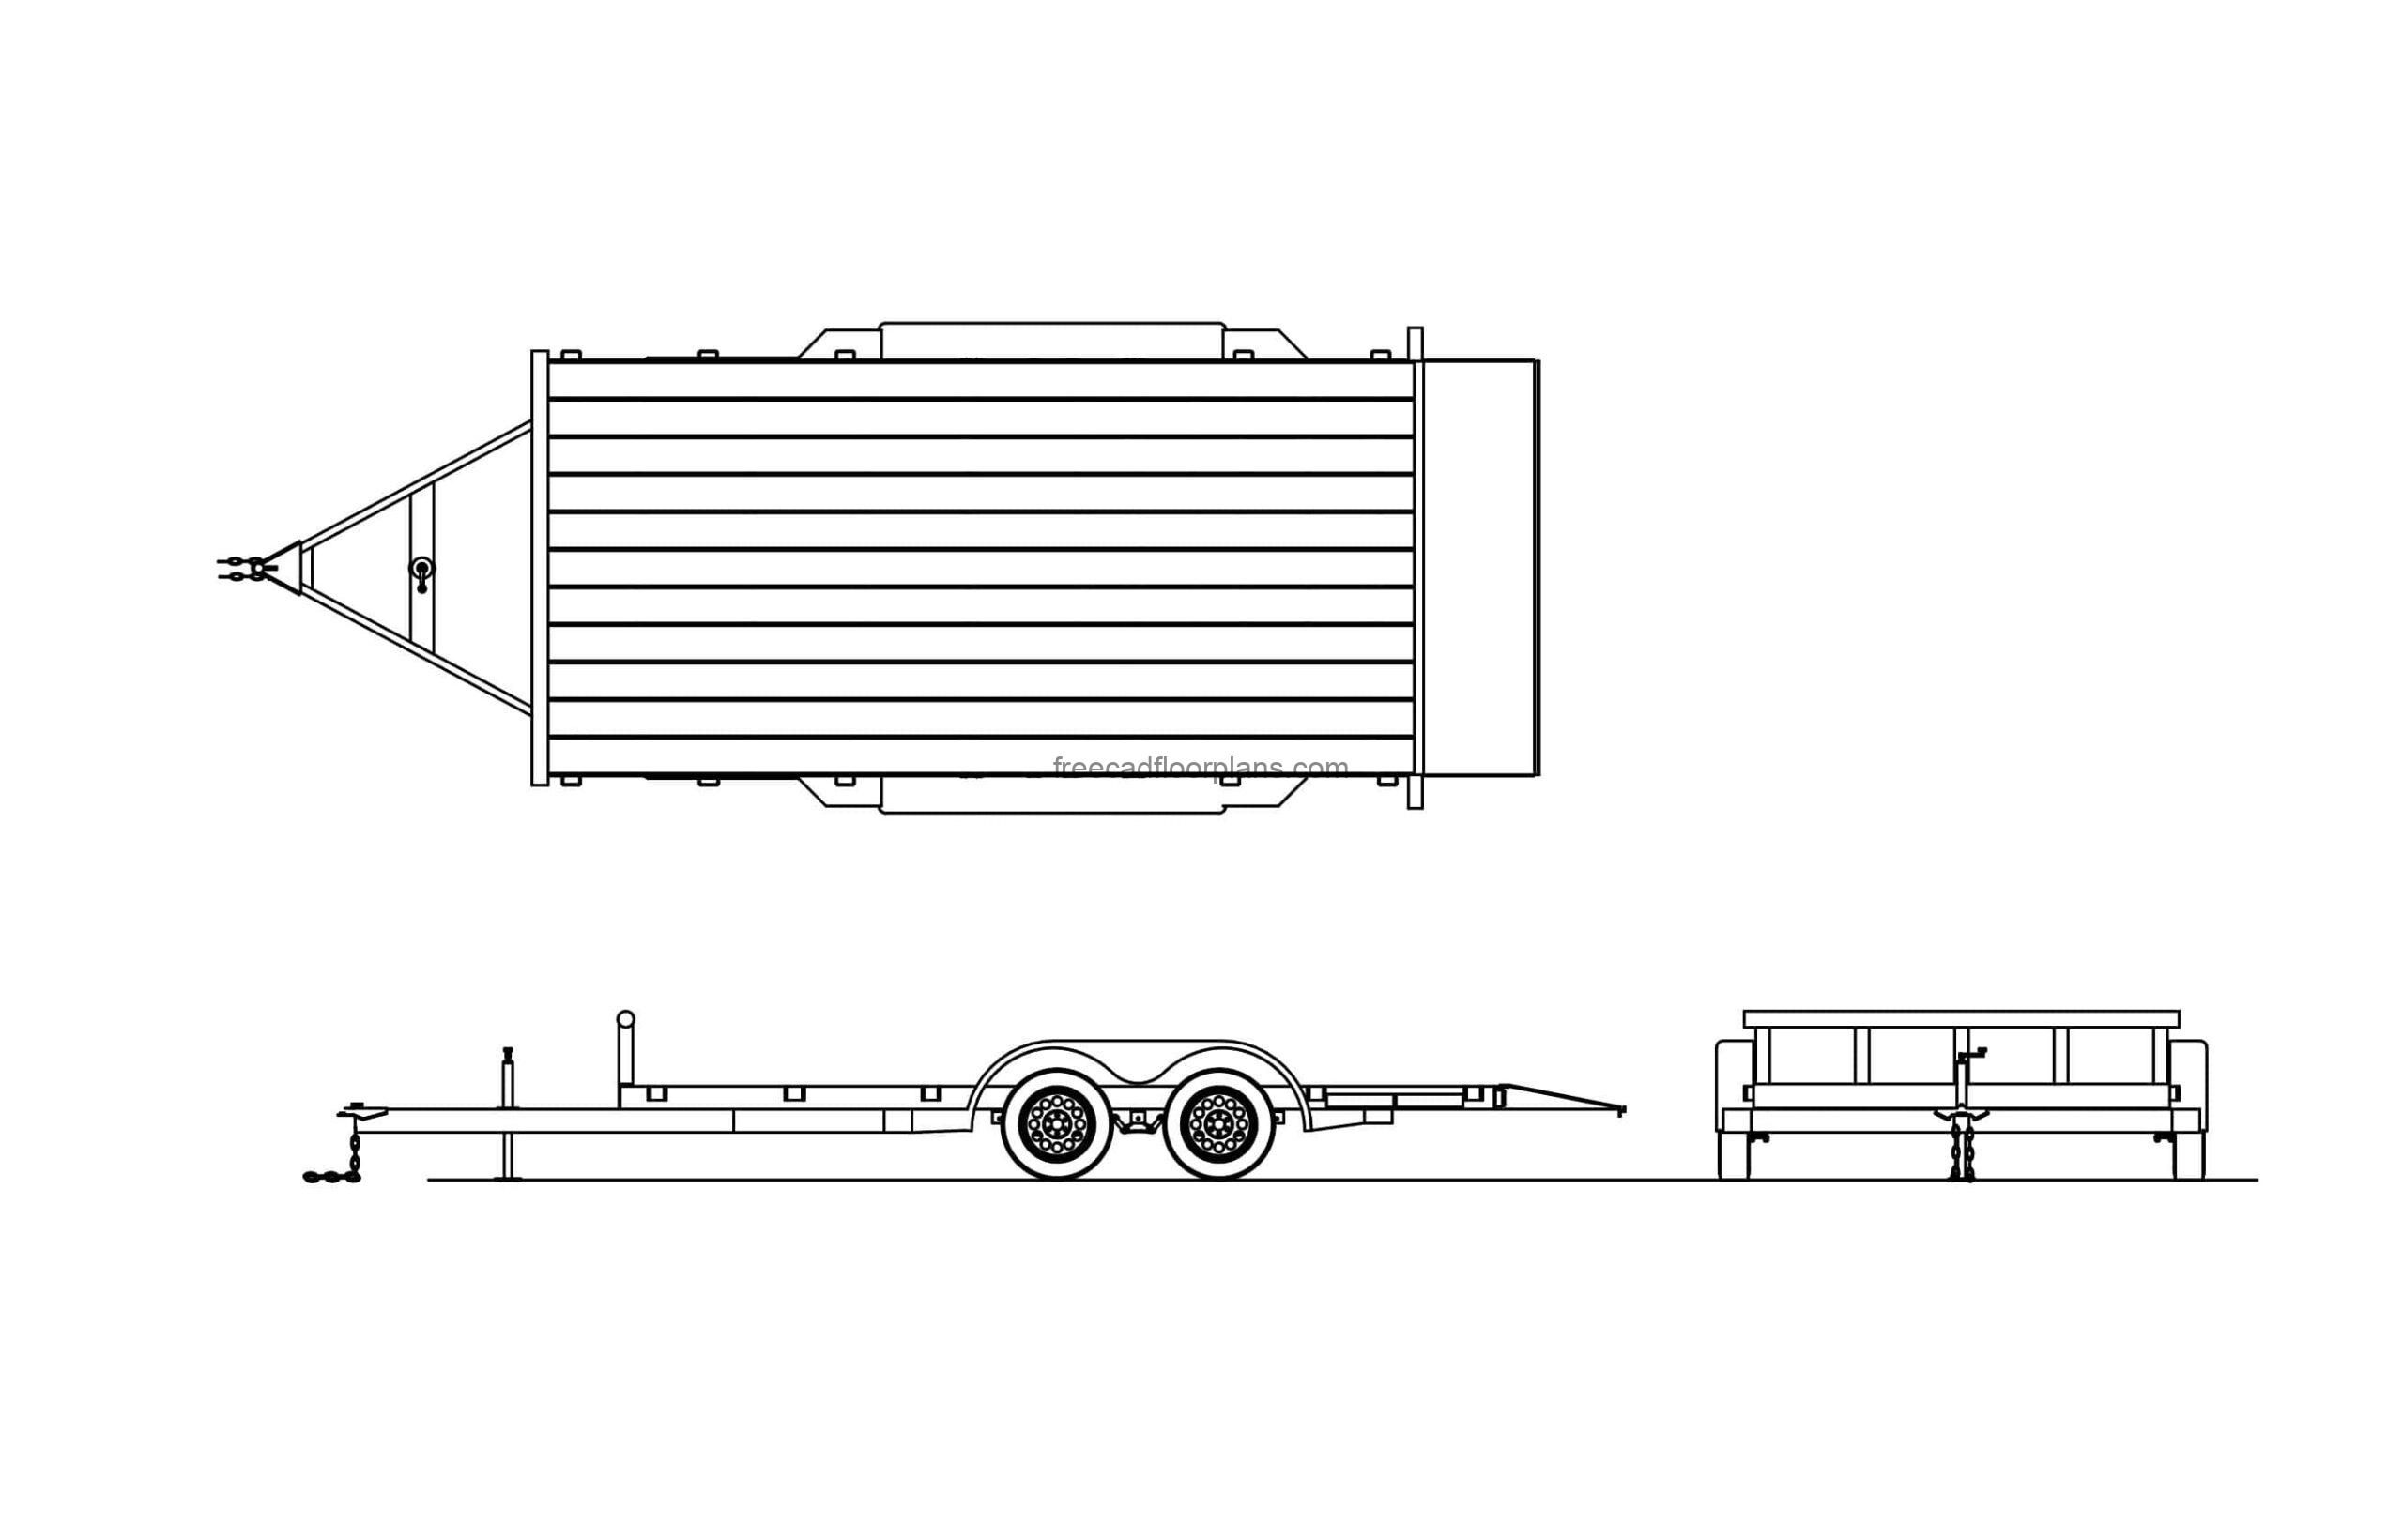 18' Car Trailer cad block 2d drawings, plan and elevations view, dwg file for free download